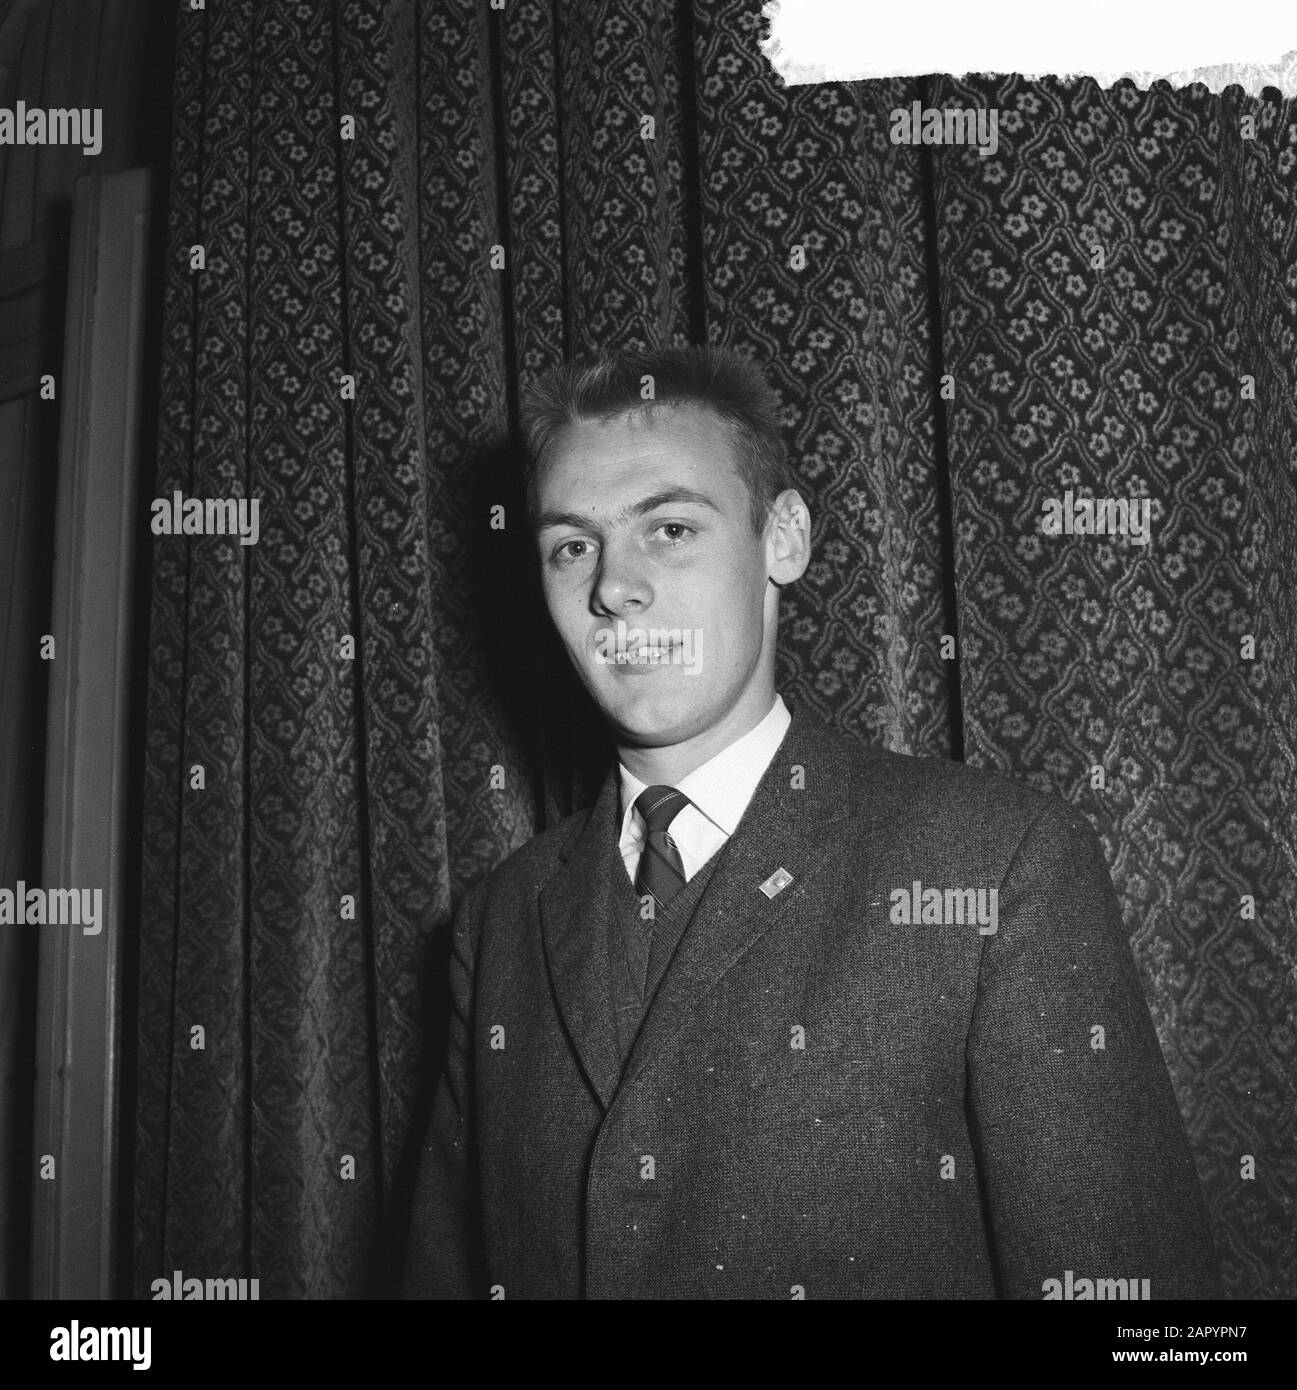 Award medals for the best baseball players, Ruud Zijlstra Date: 19 January 1961 Keywords: baseball, medals, portraits, sports Personal name: Zijlstra Ruud Stock Photo